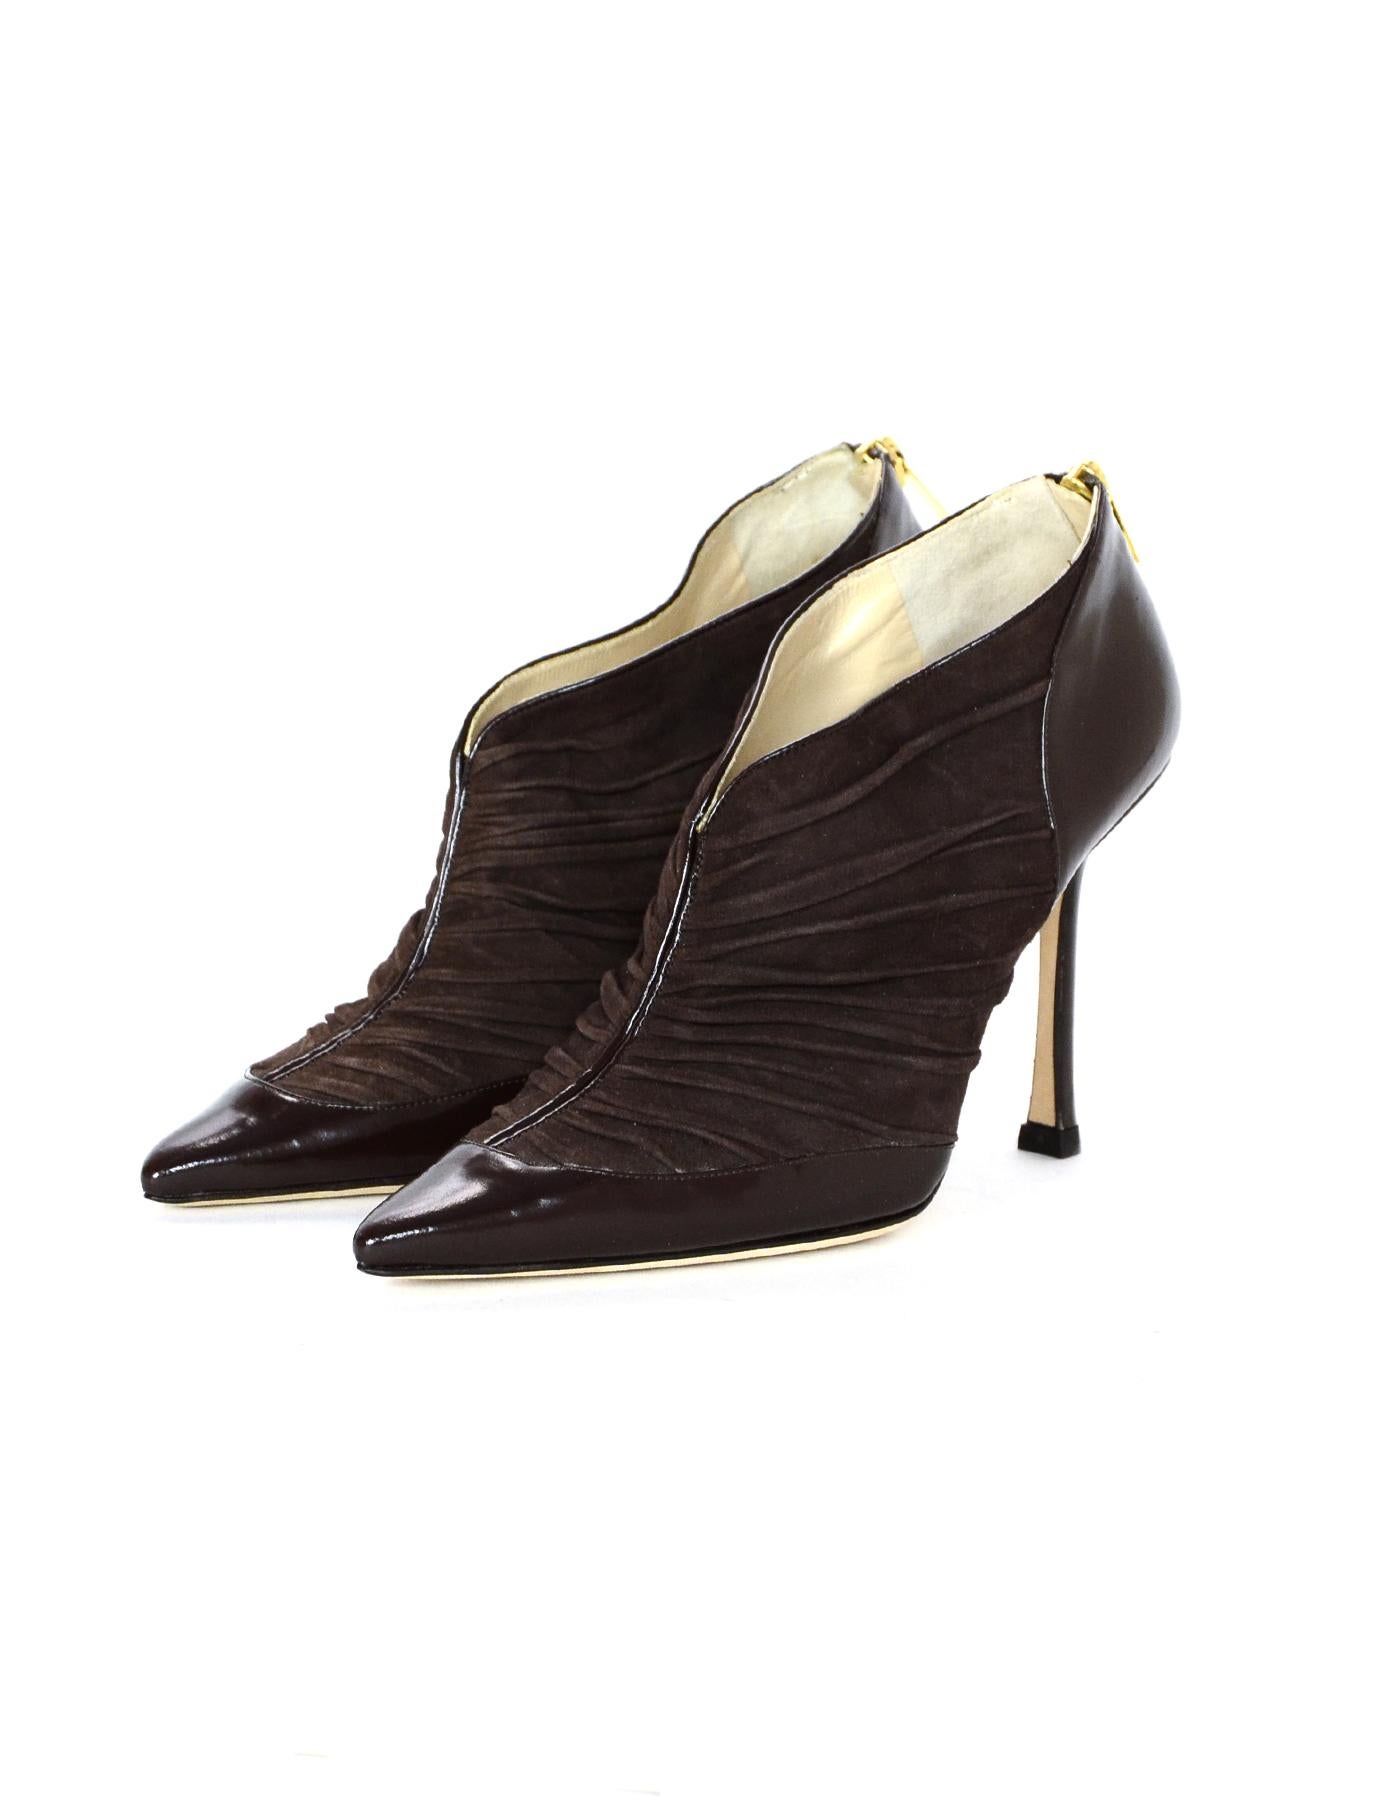 Jimmy Choo Brown Suede/Leather Ruched Point Toe Booties Sz 36

Made In: Italy
Color: Brown
Hardware: Goldtone
Materials: Suede, leather
Closure/Opening: Back zipper
Overall Condition: Excellent pre-owned condition   

Measurements: 
Marked Size: